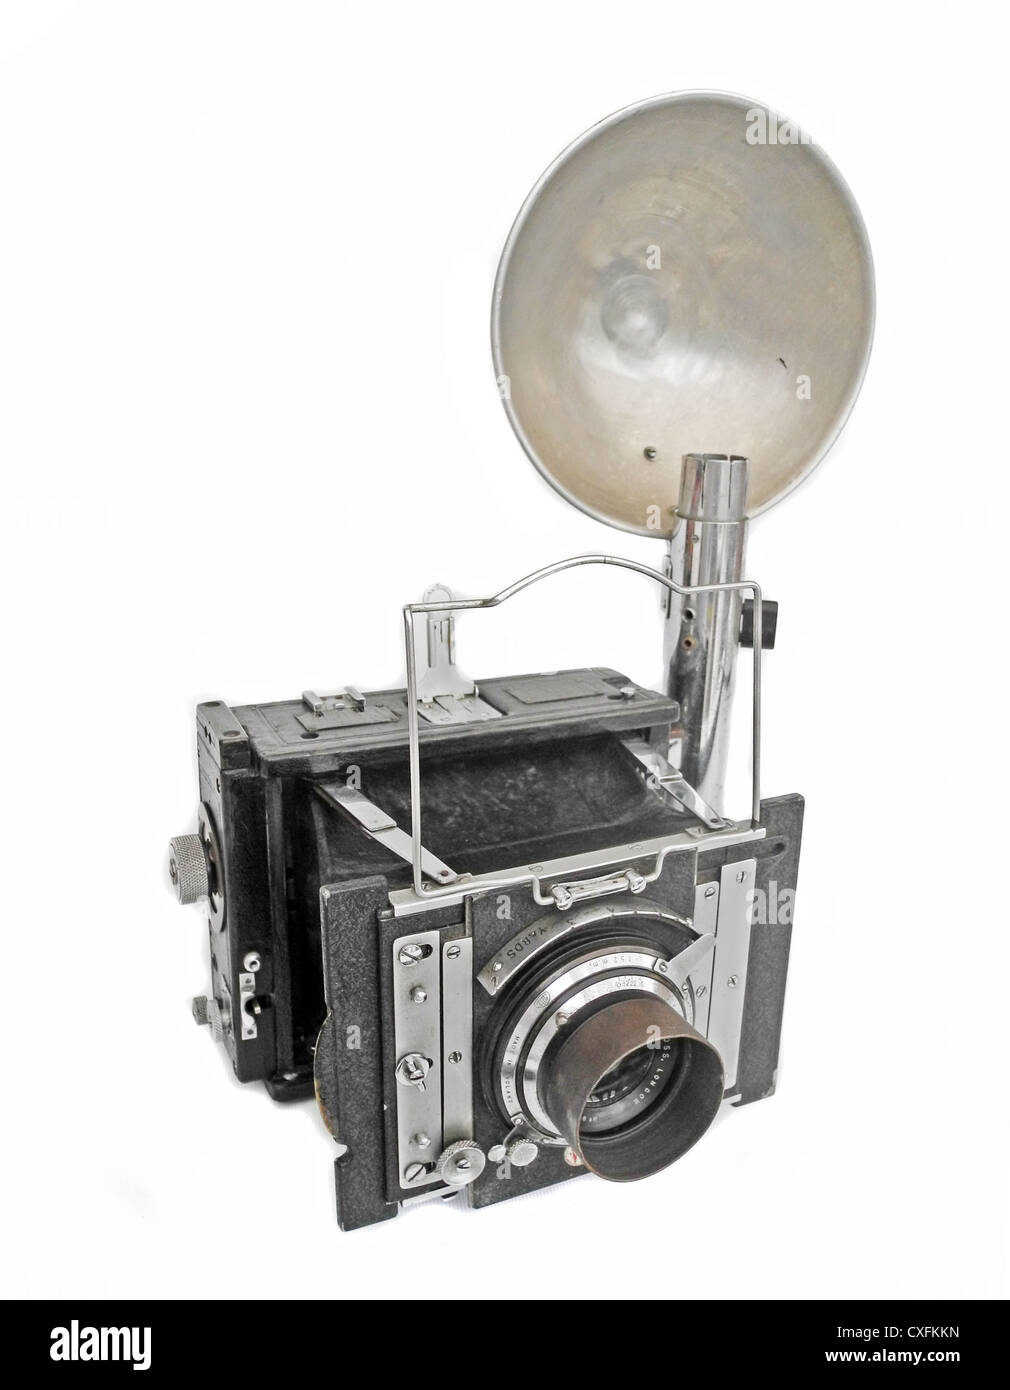 This is a vintage Fleet Street press photographer's camera - a Peeling and  Van Neck (VN) 9cmx 12cm plate camera used by photographers between the  1930's and the 1950's PROPERTY RELEASE NOT